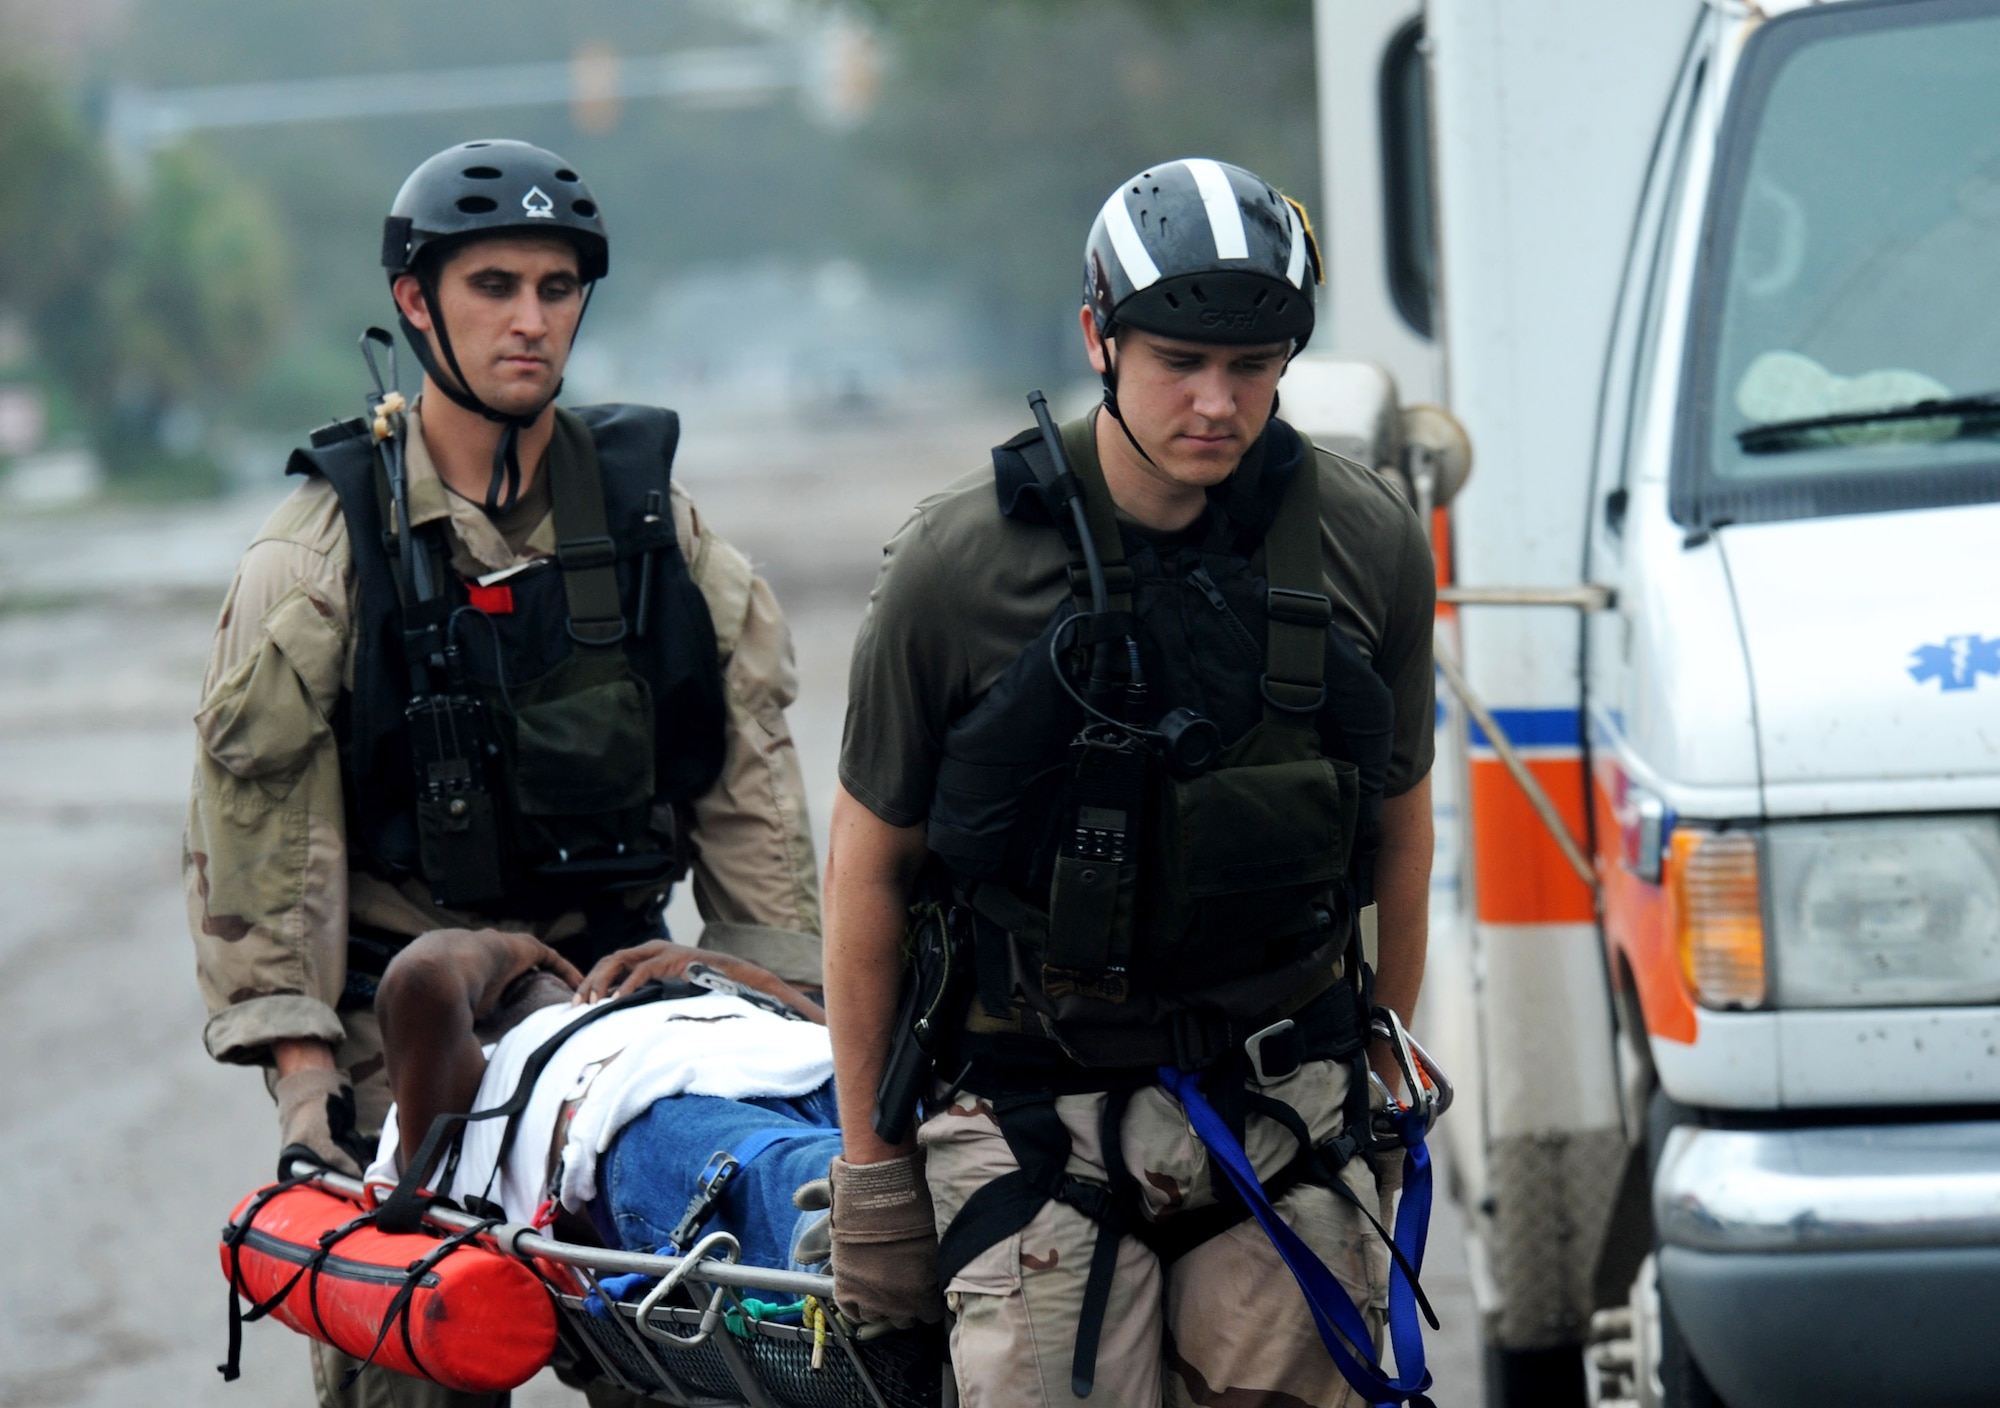 Staff Sgt. Lopaka Mounts (left) and Senior Airman Brandon Smith,cross-load an injured Galveston, Texas, resident from an ambulance for air evacuation during search and rescue operations after Hurricane Ike, Sept. 13. Sergeant Mounts and Airman Smith are both pararescueman assigned to the 331st Air Expeditionary Group at Randolph Air Force Base, Texas. (U.S. Air Force photo/Staff Sgt. James L. Harper Jr.)
